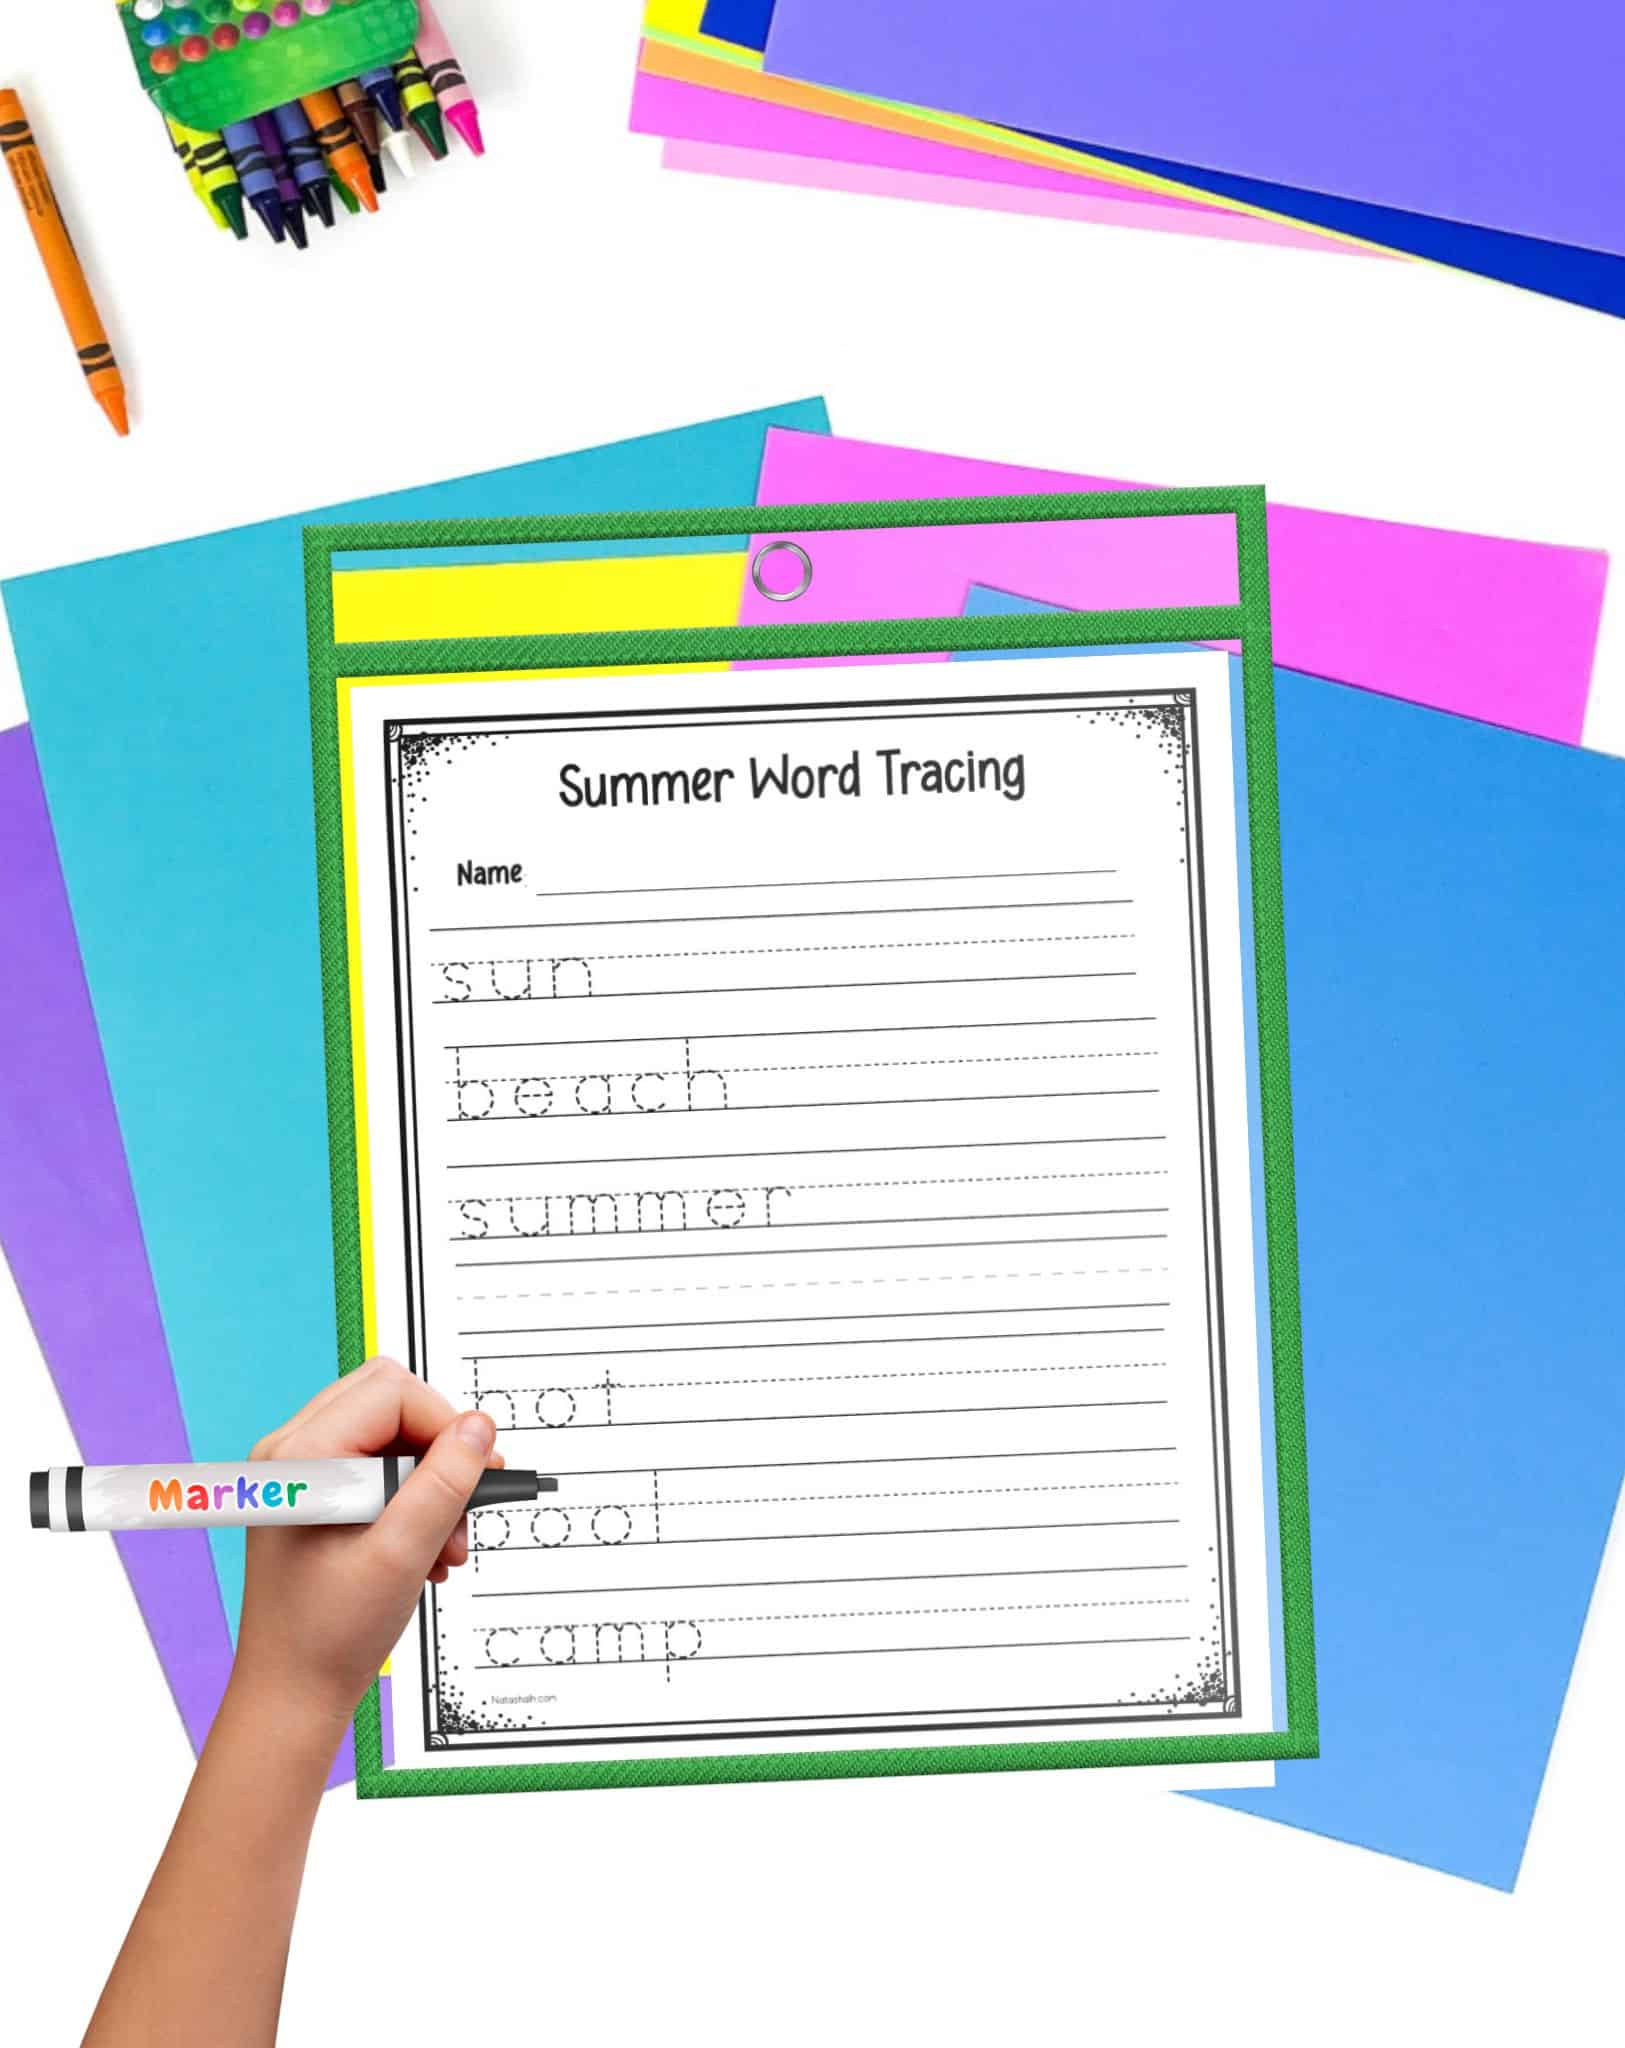 Colorful student desk supplies with a summer word tracing worksheet in a green dry erase pocket